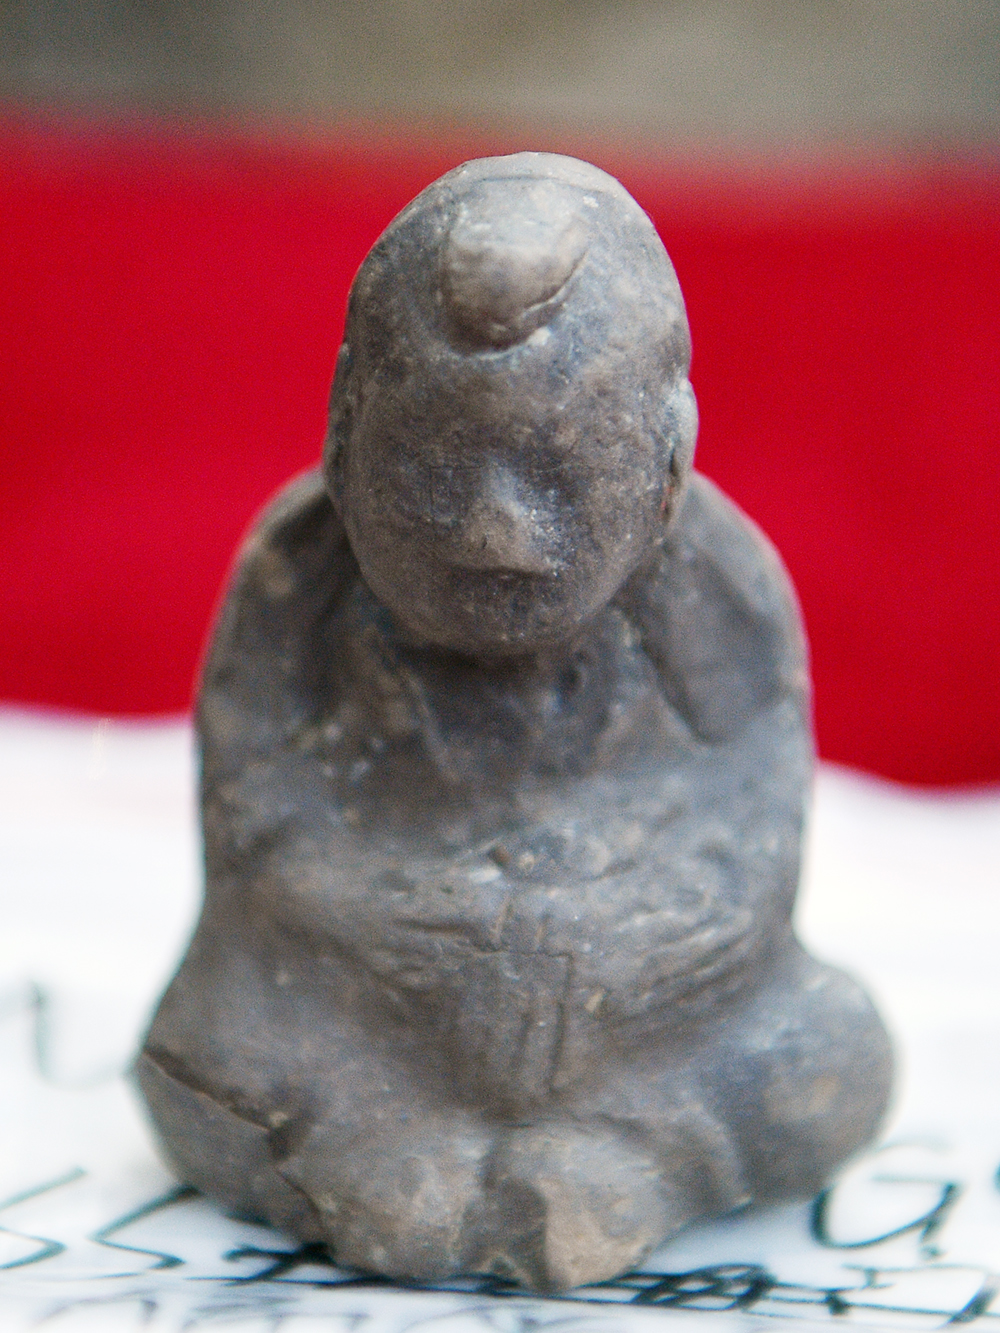 A Mo He Le figurine unearthed from a Song Dynasty site is discovered in the Dongpo District of Meishan, Sichuan in 2019. /CNSPHOTO